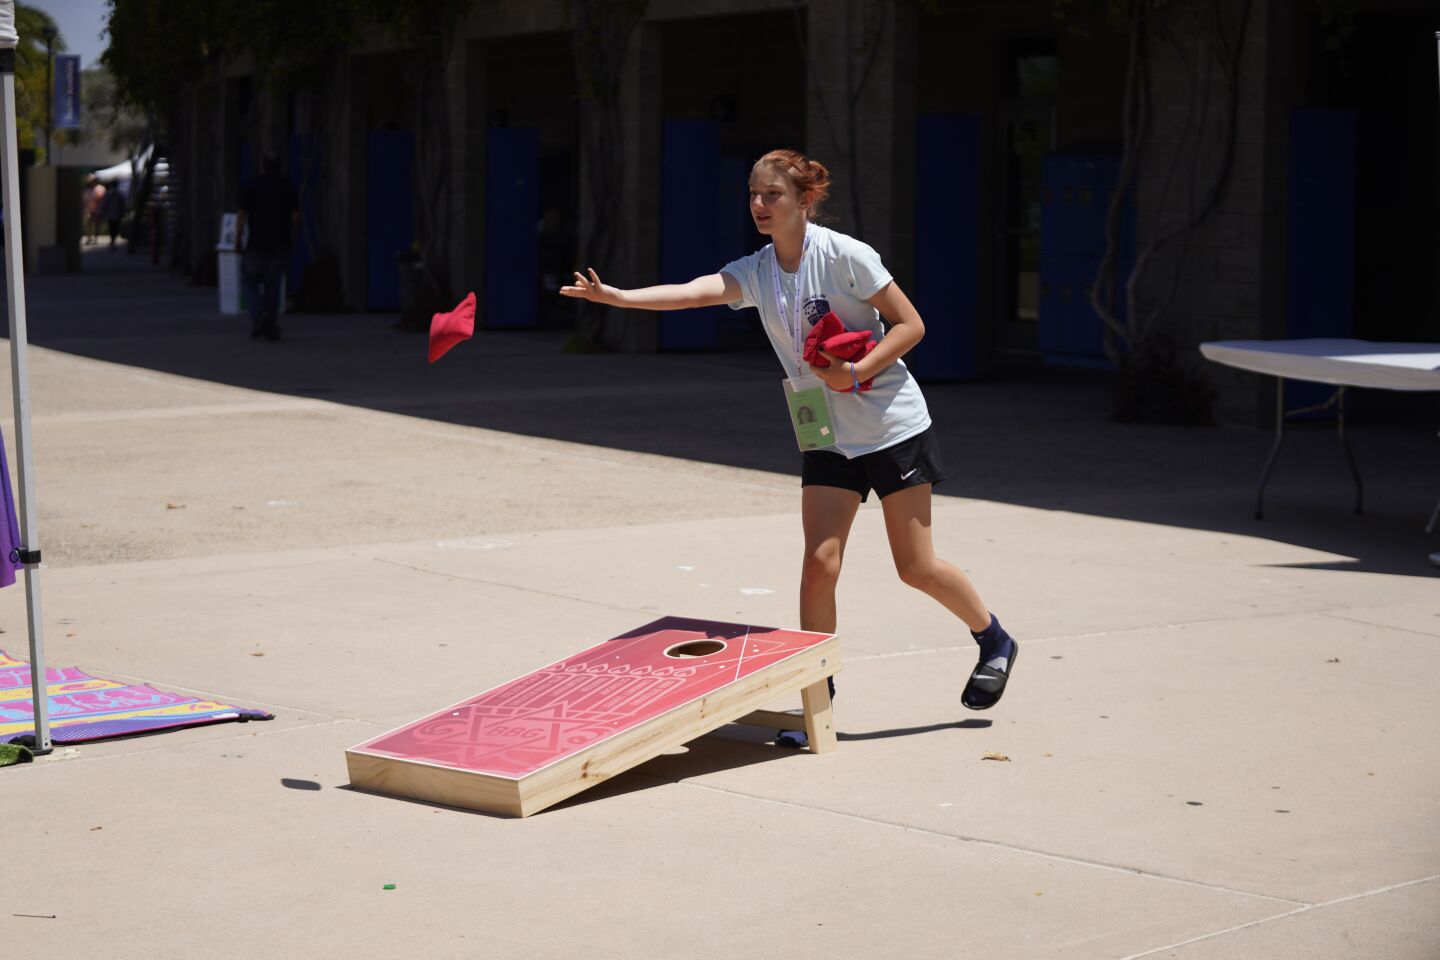 A cornhole competitor plays during the Maccabi Games.